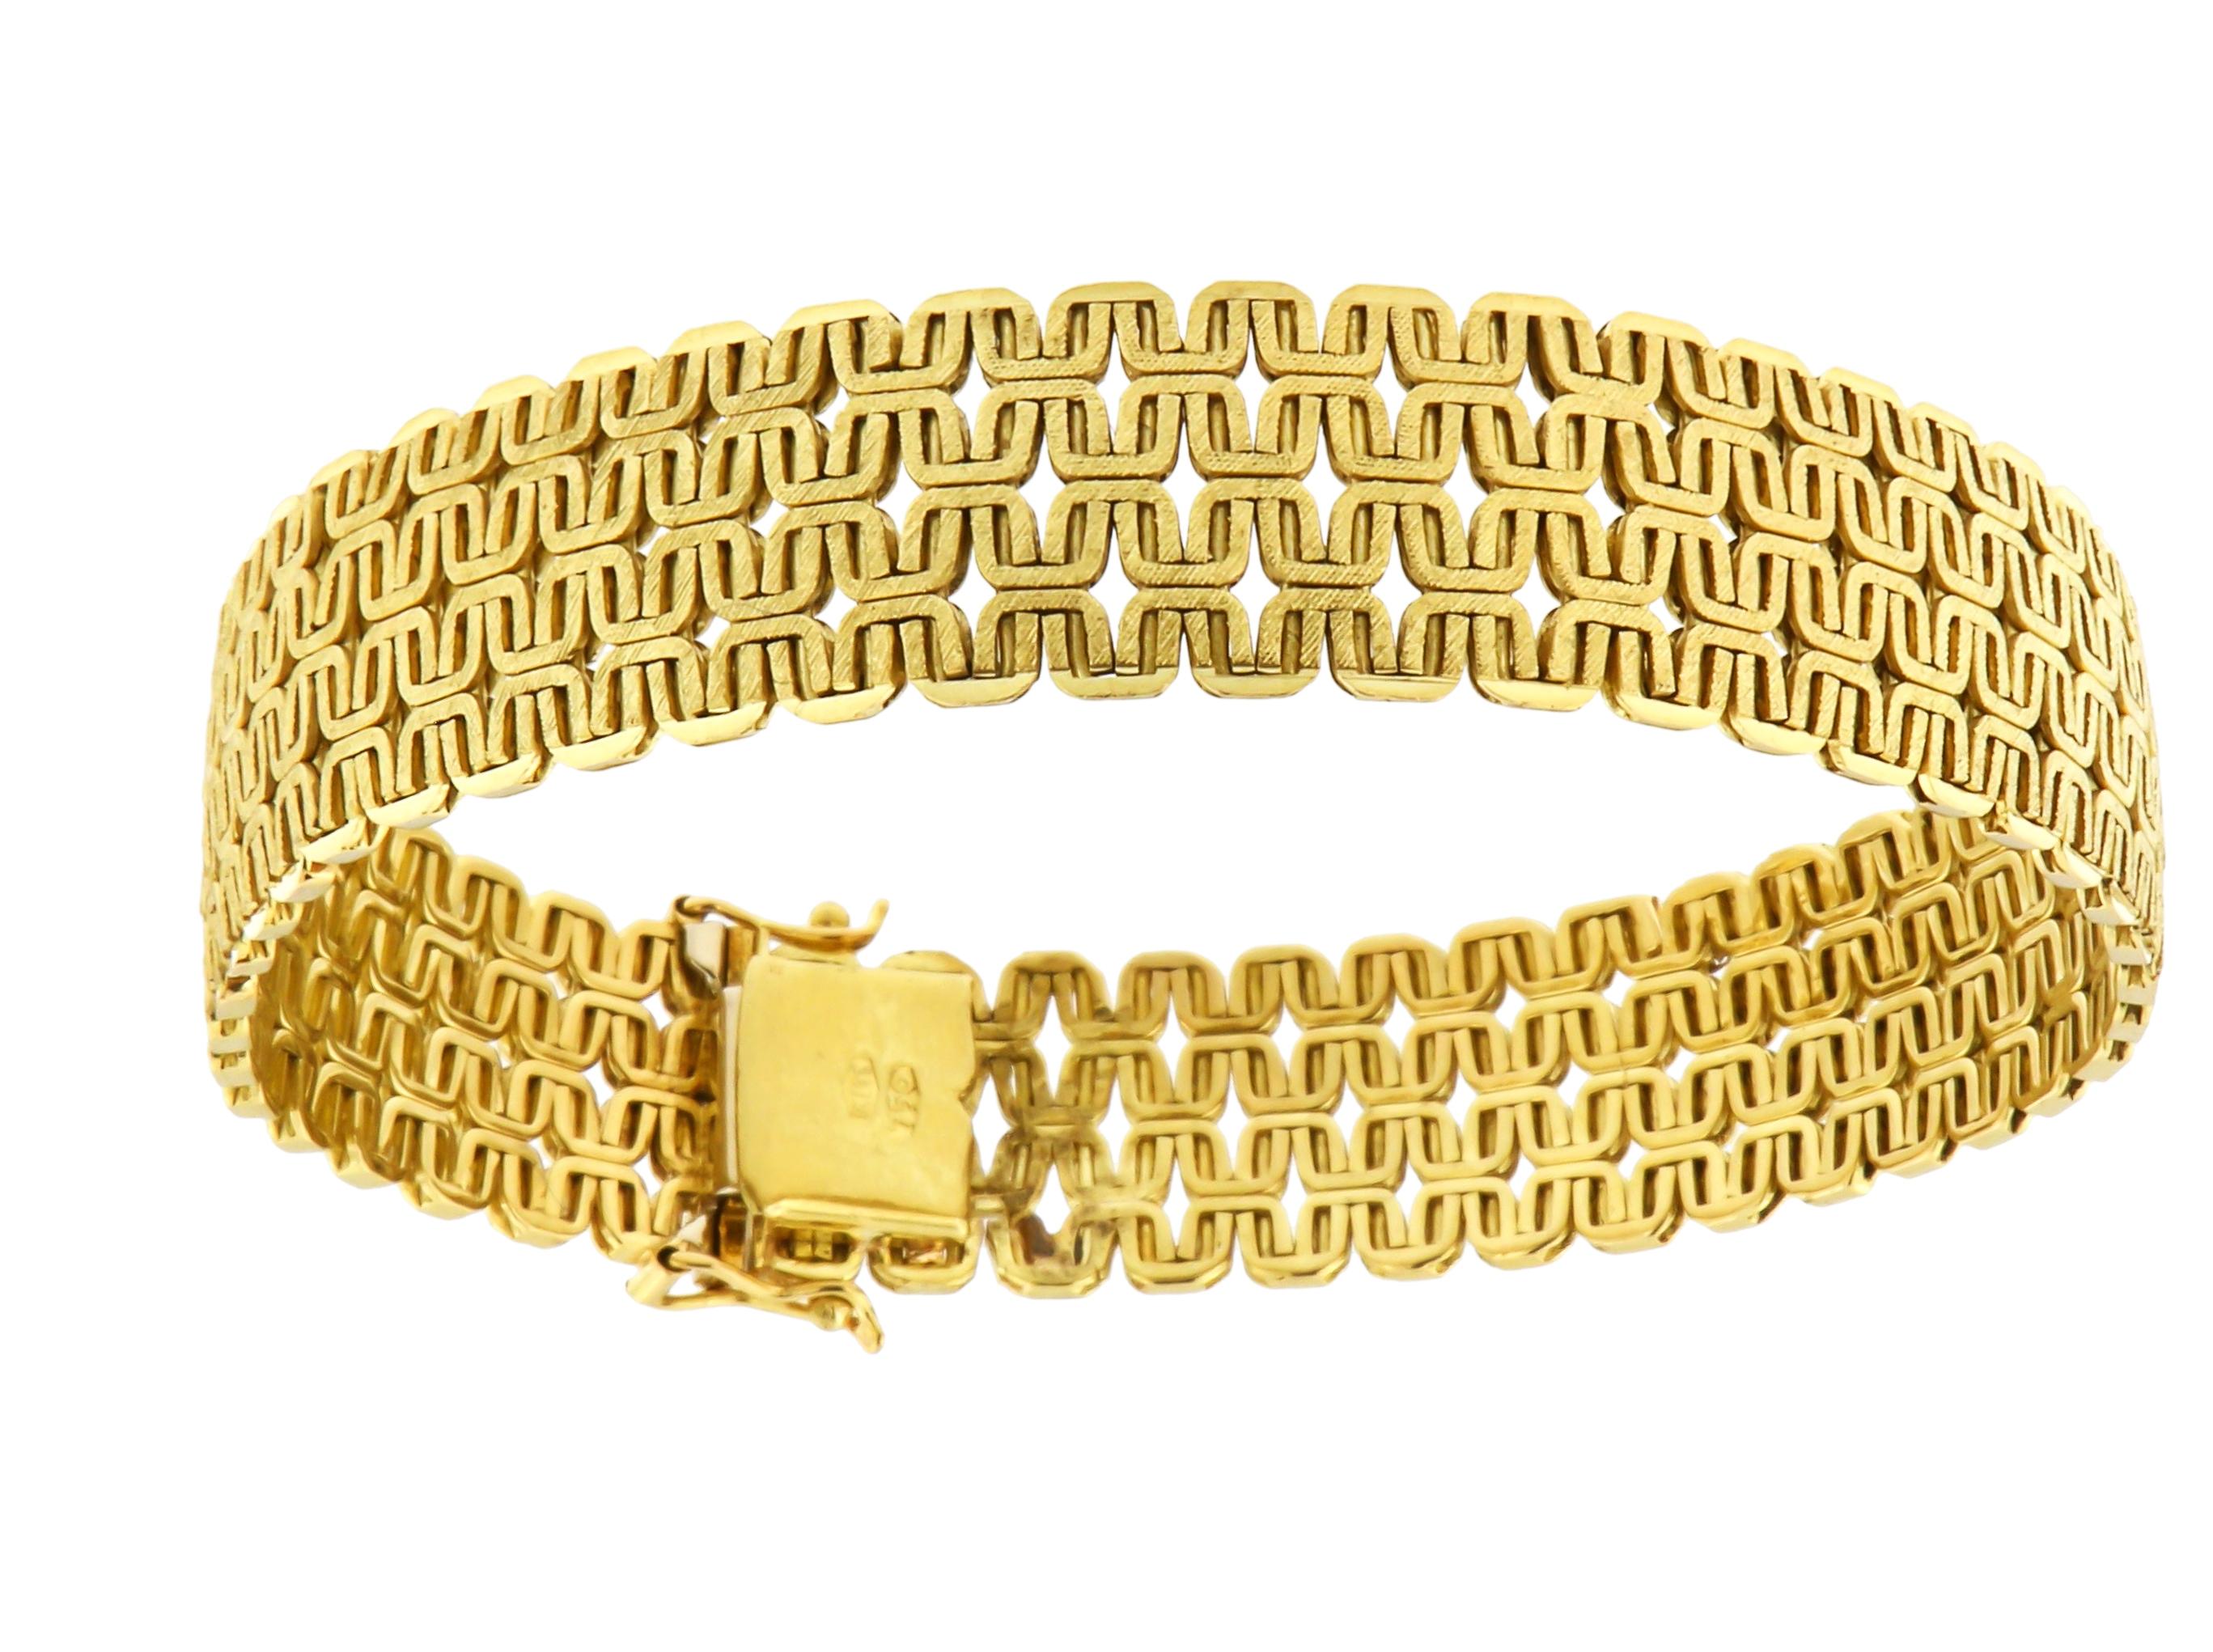 1960s yellow gold 18k made in Vicenza Italy
The total length of the bracelet is 7.874 inches,  the inside dimension when clasped is 2.559 x 2.165 inches.
It  is stamped with the Italian Mark